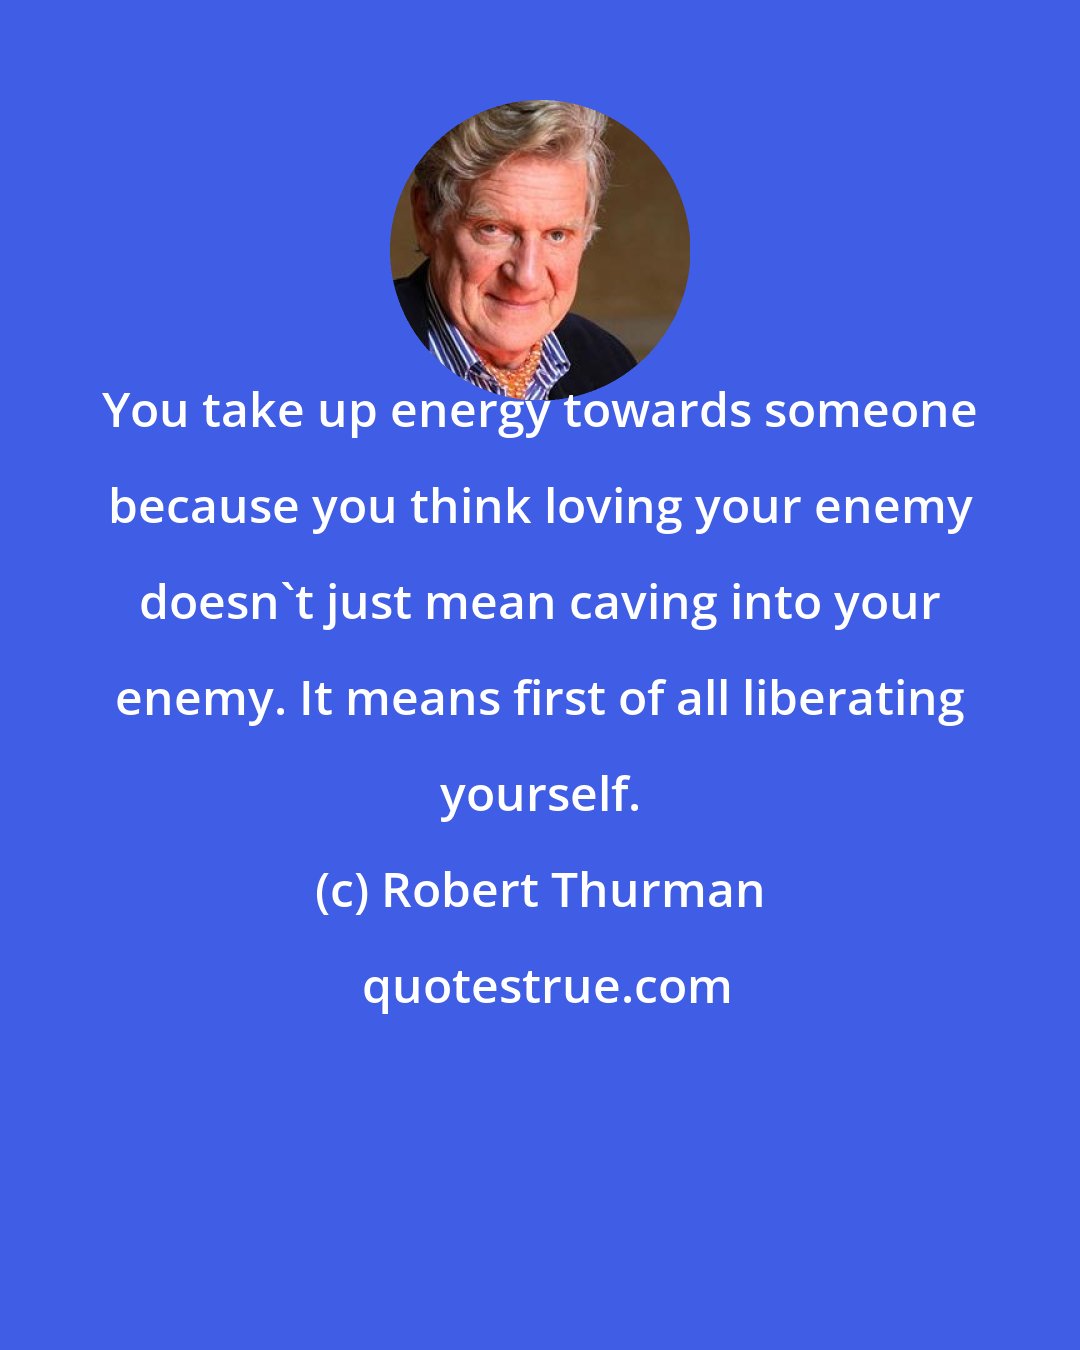 Robert Thurman: You take up energy towards someone because you think loving your enemy doesn't just mean caving into your enemy. It means first of all liberating yourself.